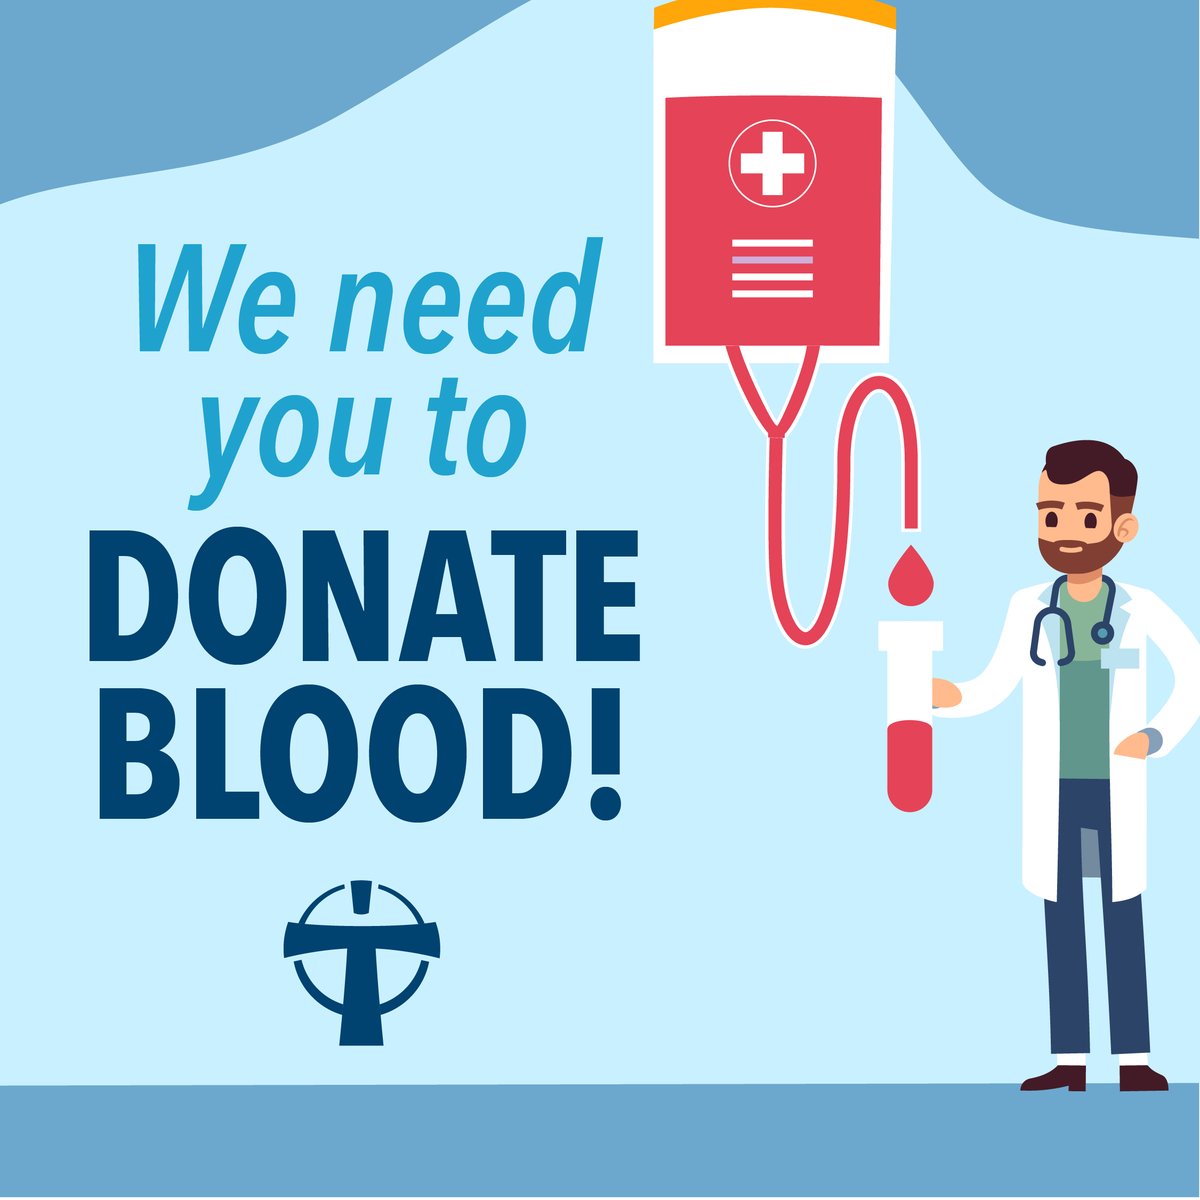 ⚠️ We are in need of all blood types but have an urgent need for O blood and platelets. Donors are encouraged to eat well before donating. No appointment is needed. Learn more about donating here: bit.ly/3ZCZefP